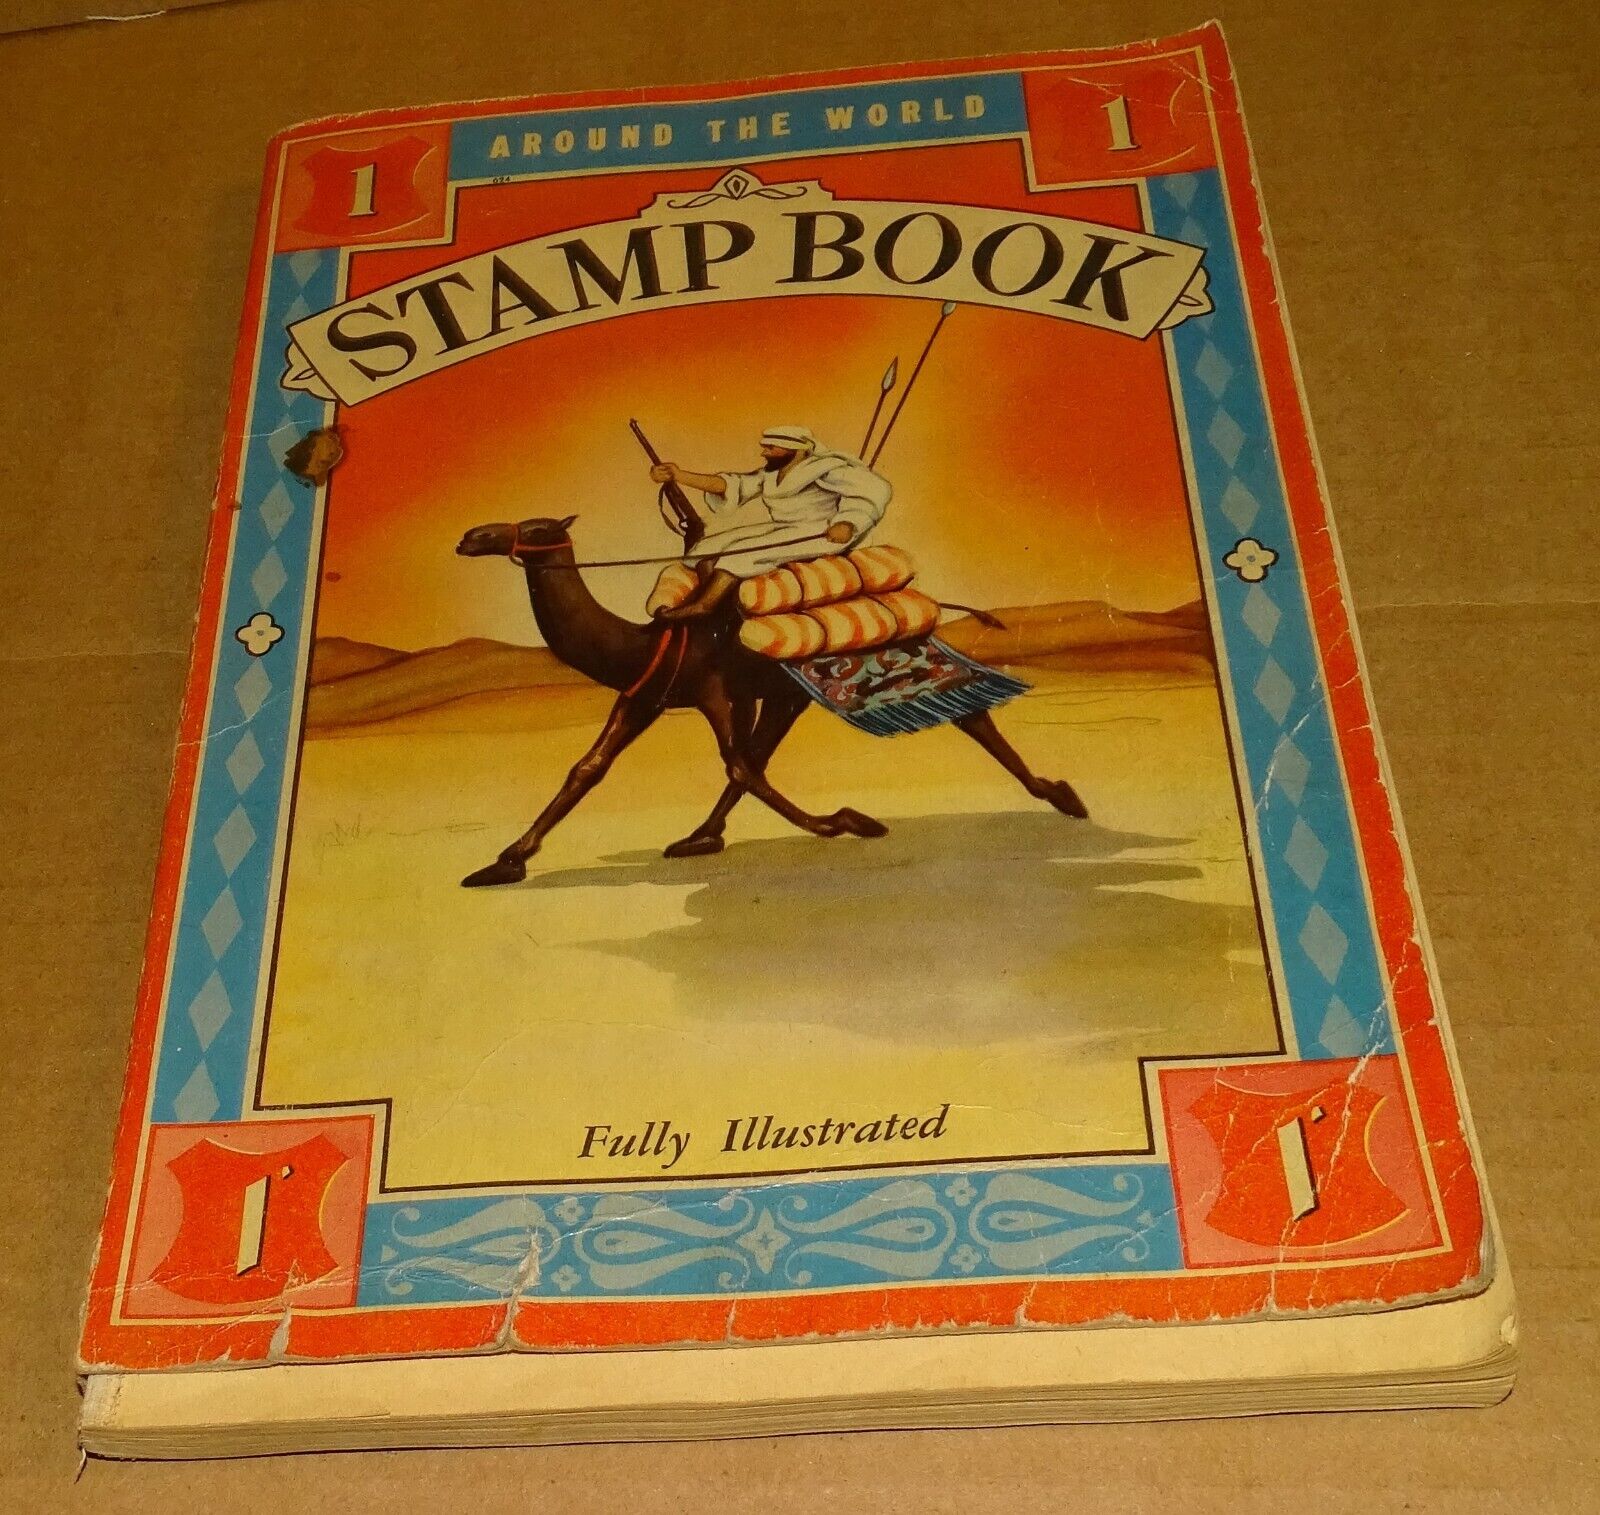 1935 Whitman Around the World Stamp Book with many old stamps